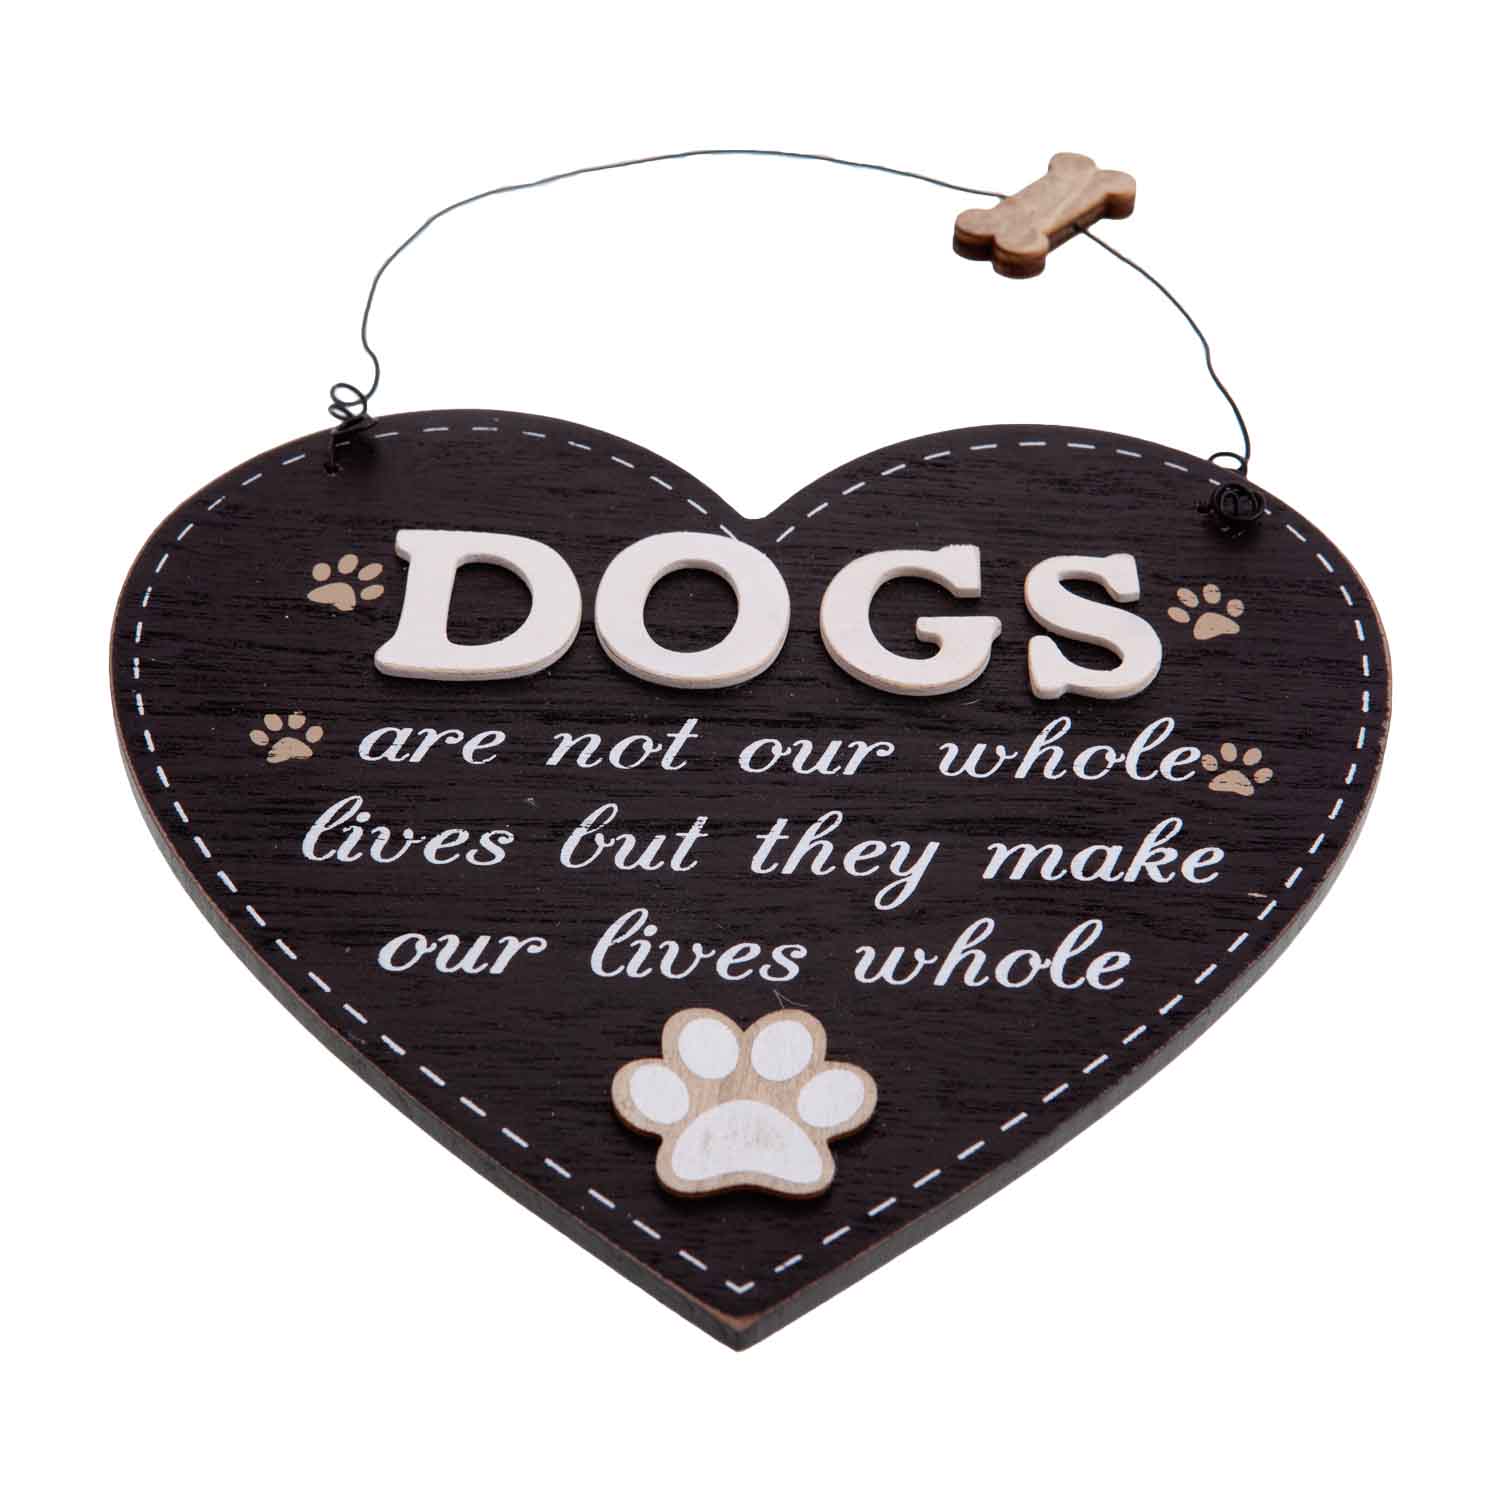 Dog Krazy Gifts - Dogs Make Our Lives Whole - Large Heart, Part Of The Wide Range of Dog Signs available from DogKrazyGifts.co.uk